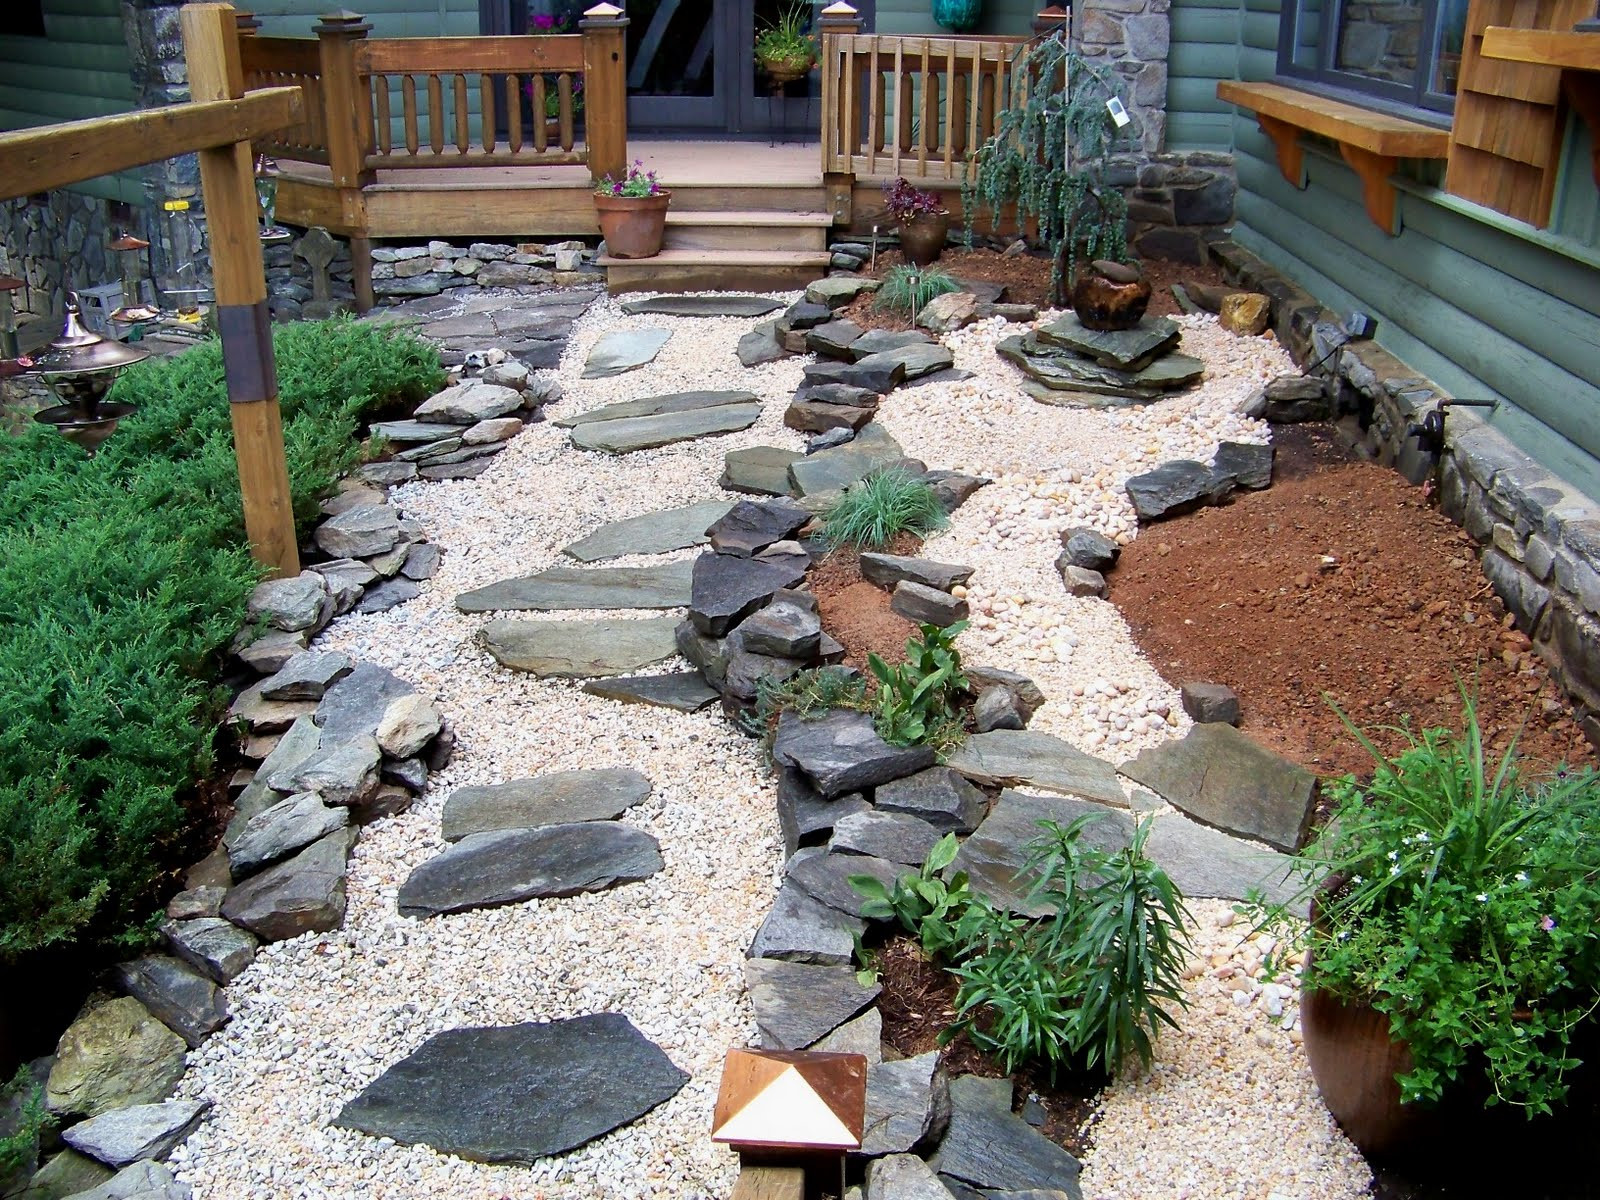 Outdoor Landscape With Stones
 Japanese Garden Design En passing Simplicity and Harmony